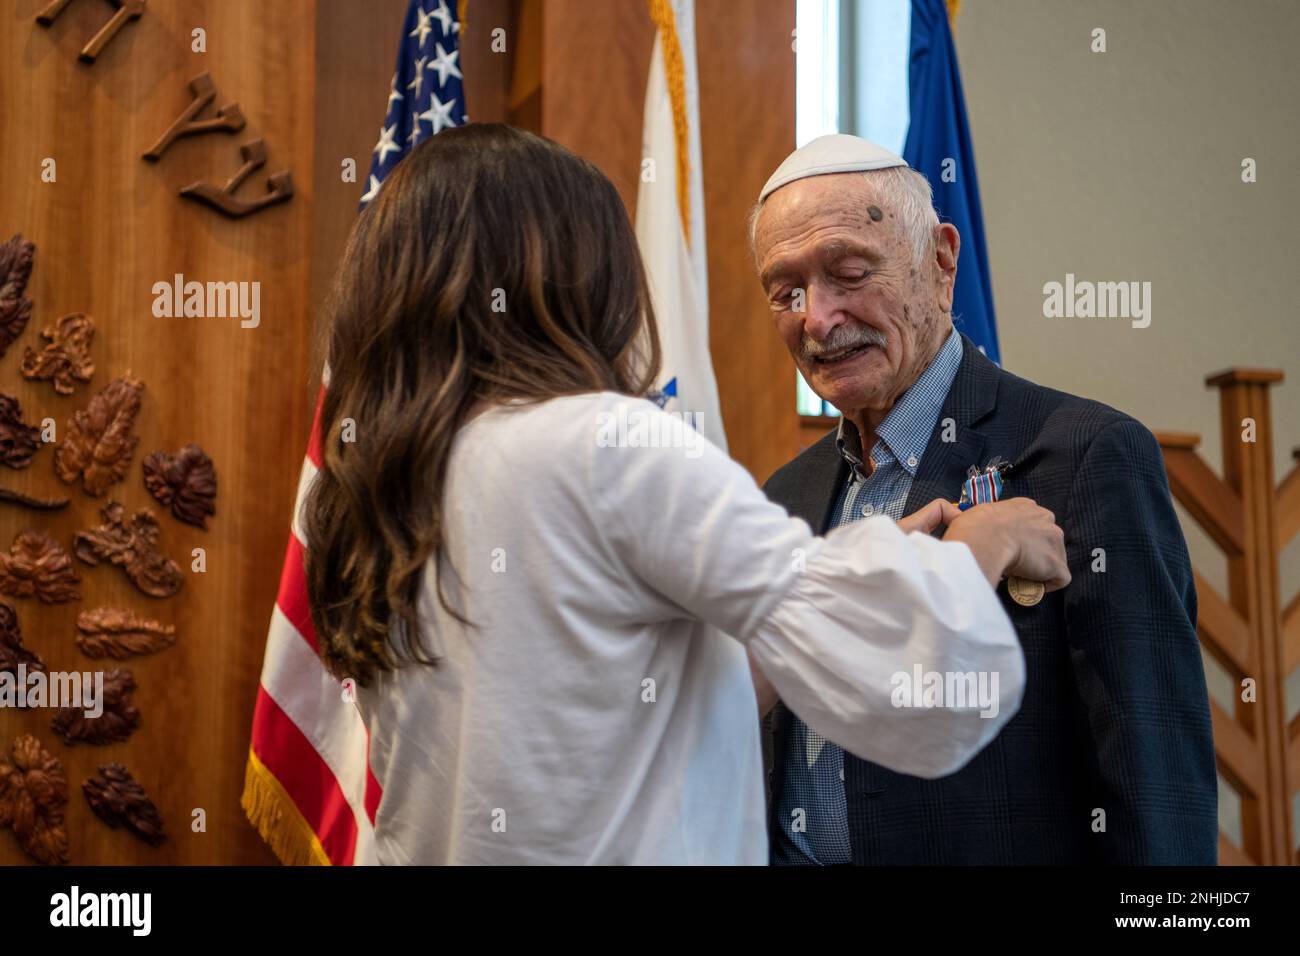 U.S. Army Air Corps 1st Lt. Gerald Teldon (right), retired, receives his award from his granddaughter, Chanie Kamman, for his honorable service as a pilot on July 29, 2022, at the Chabad Center for Jewish Life and Learning, San Antonio, Texas. Teldon, born in Bronx, N.Y., in 1924, joined the military in 1944. He completed 62 missions during WWII and the Korean War. Lt. Col. Andrew Stein, 502nd Operations Support Squadron commander, was the presiding officers. The awards presented to Teldon are as follows: the Air Medal; American Campaign Medal; European – African – Middle Eastern Campaign Meda Stock Photo